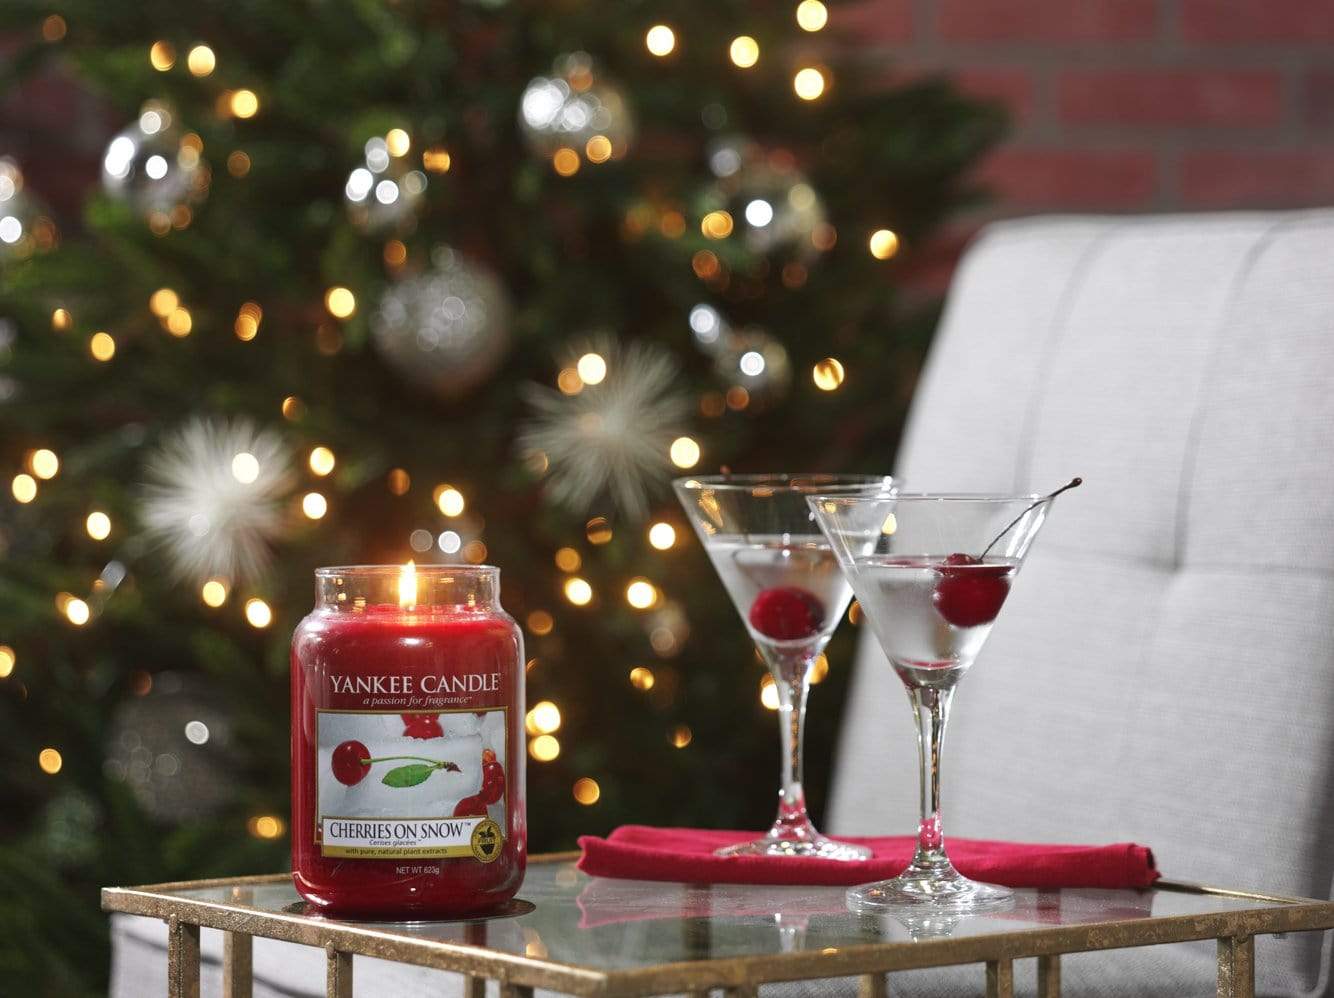 Yankee Candle Large Jar Candle Yankee Candle Large Jar - Cherries On Snow (Limited Edition Returning Fragrance)